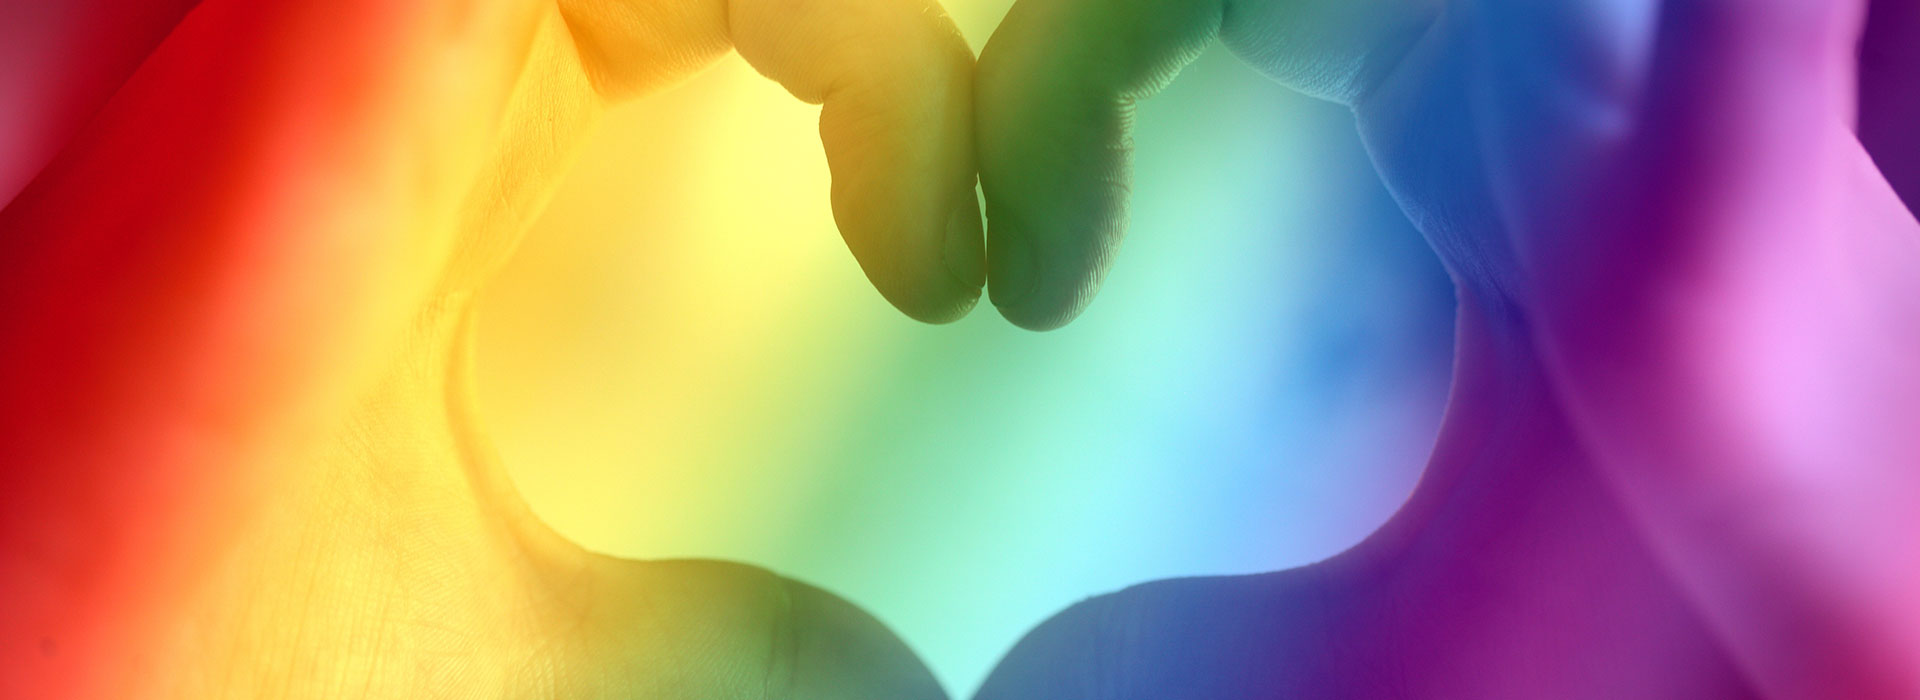 Hands form a heart against a rainbow background